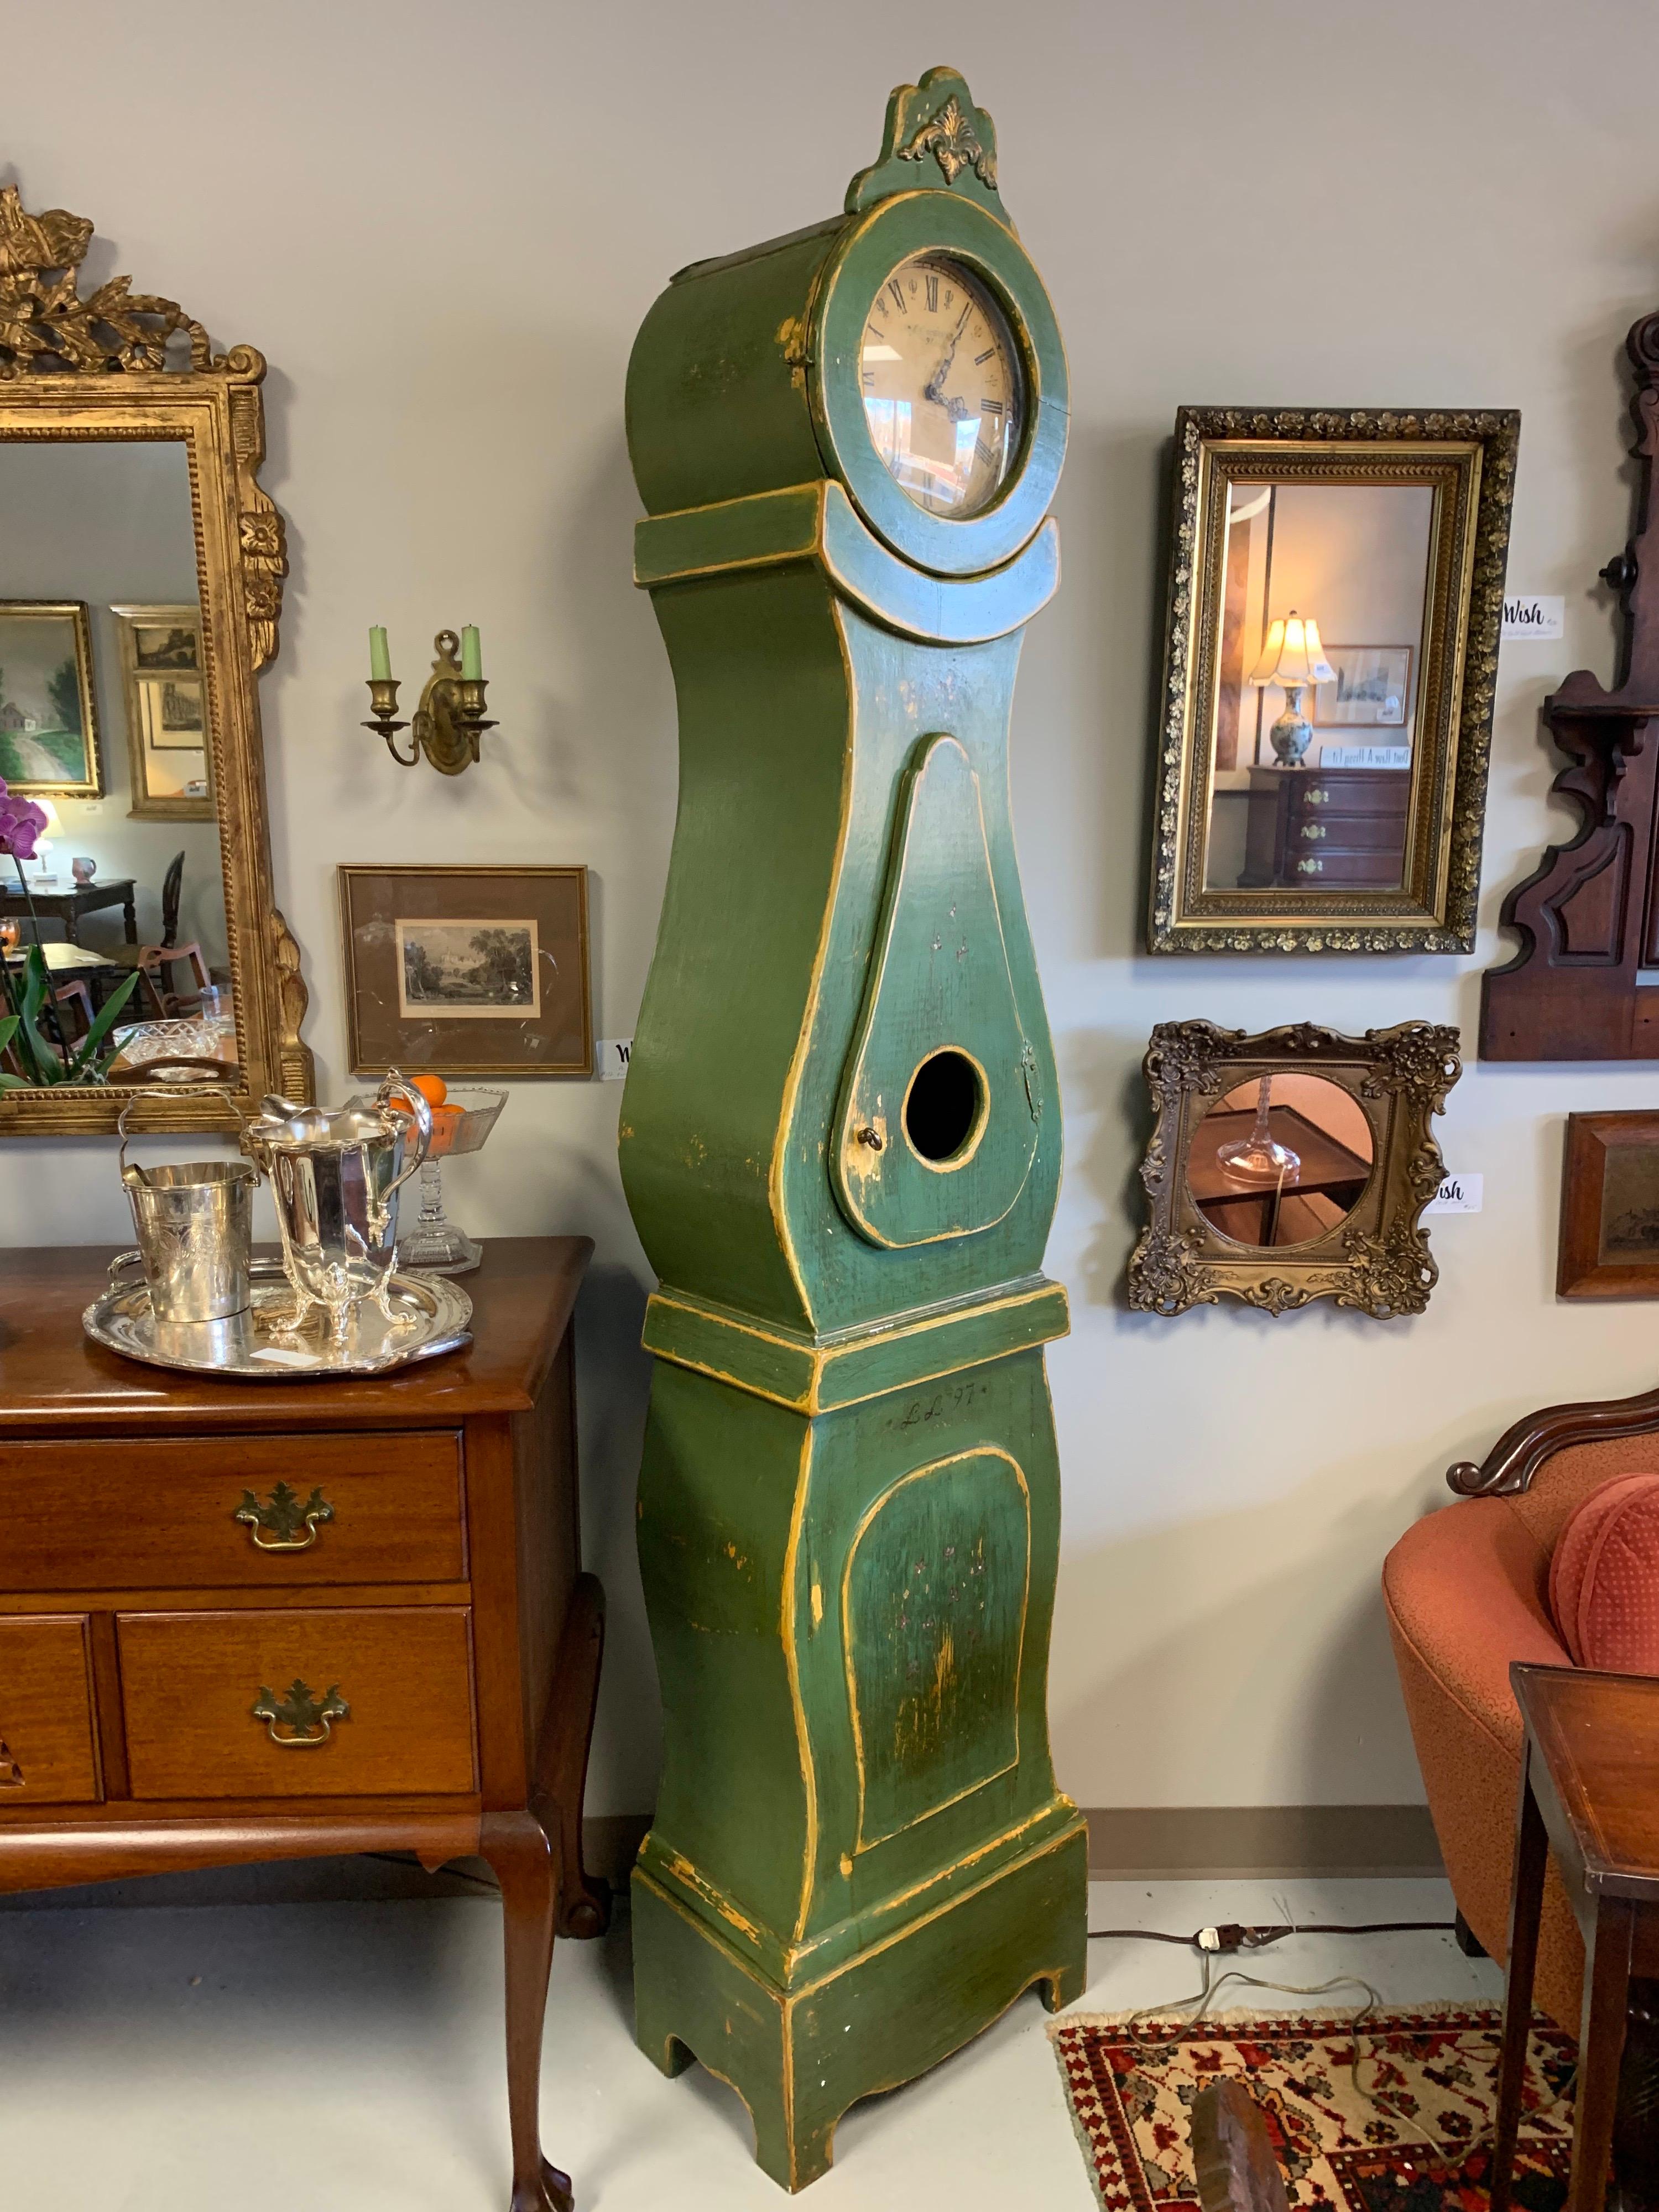 Green painted replica of an antique Gustavian Mora clock, a type of longcase clock. The name comes from the Swedish town of Mora where the clocks were made beginning in the late 1800s. This replica was hand crafted and handpainted by Swedish